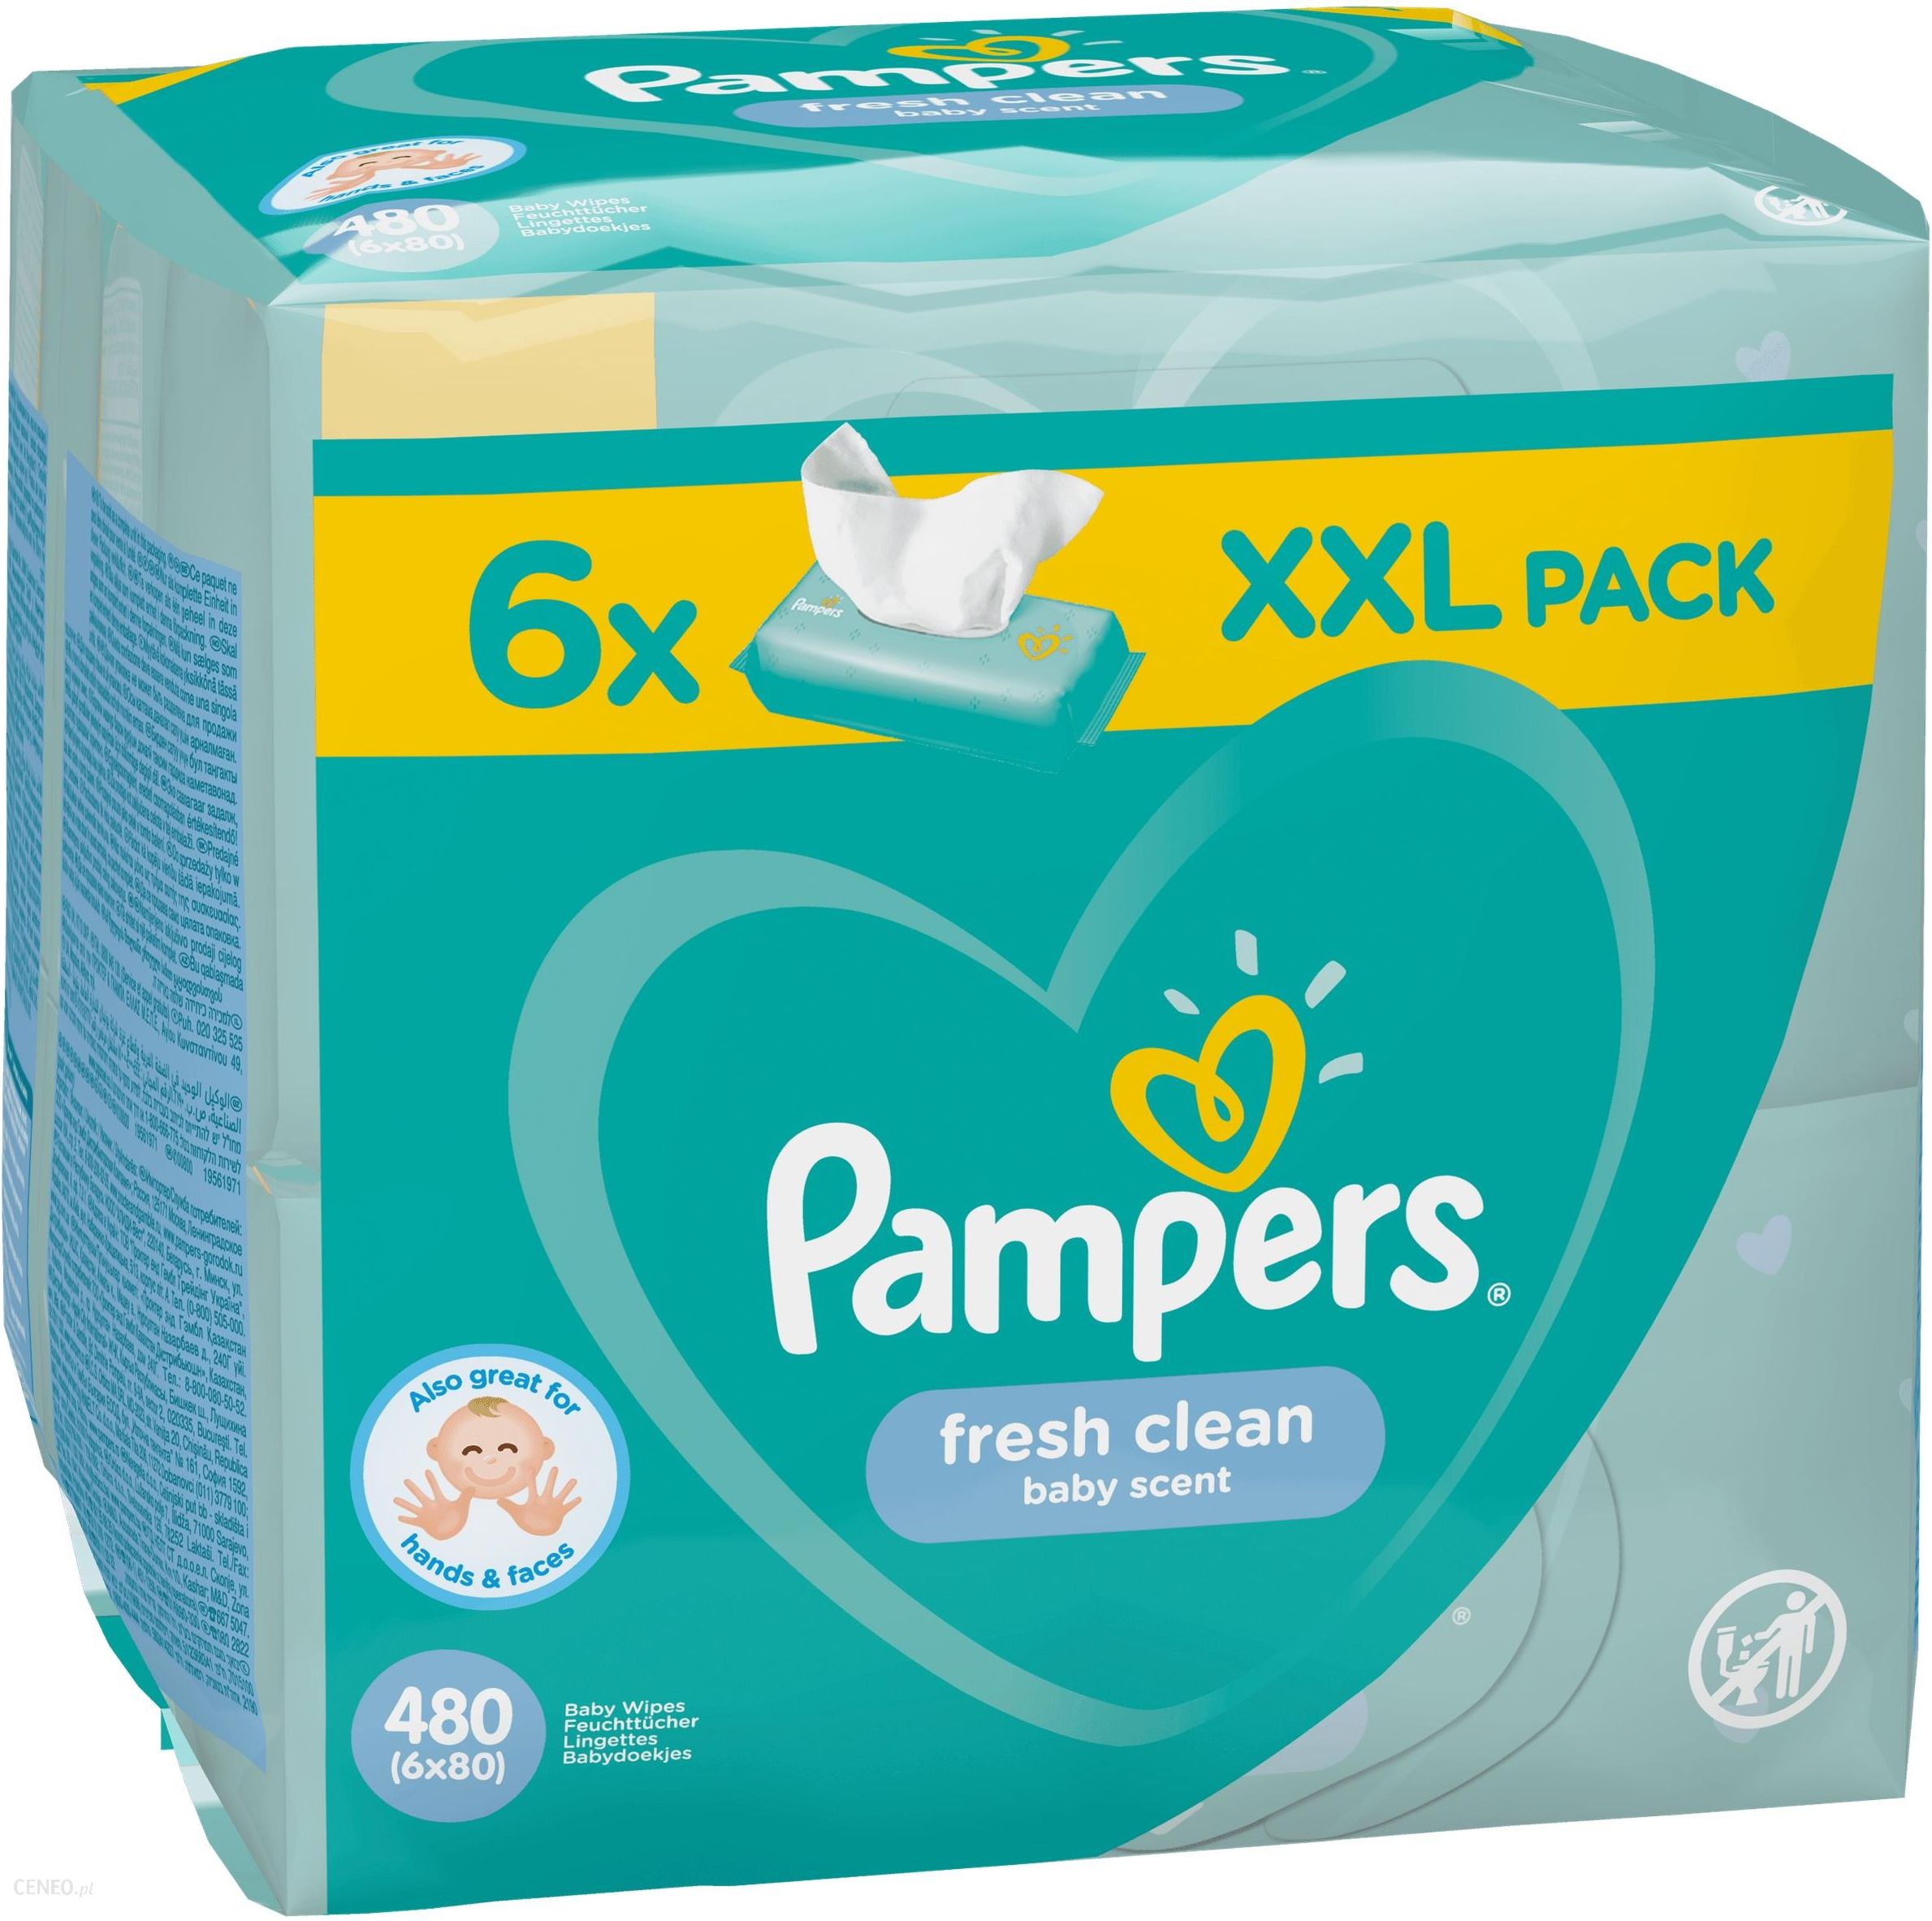 pampers 4 act baby 9-14kg